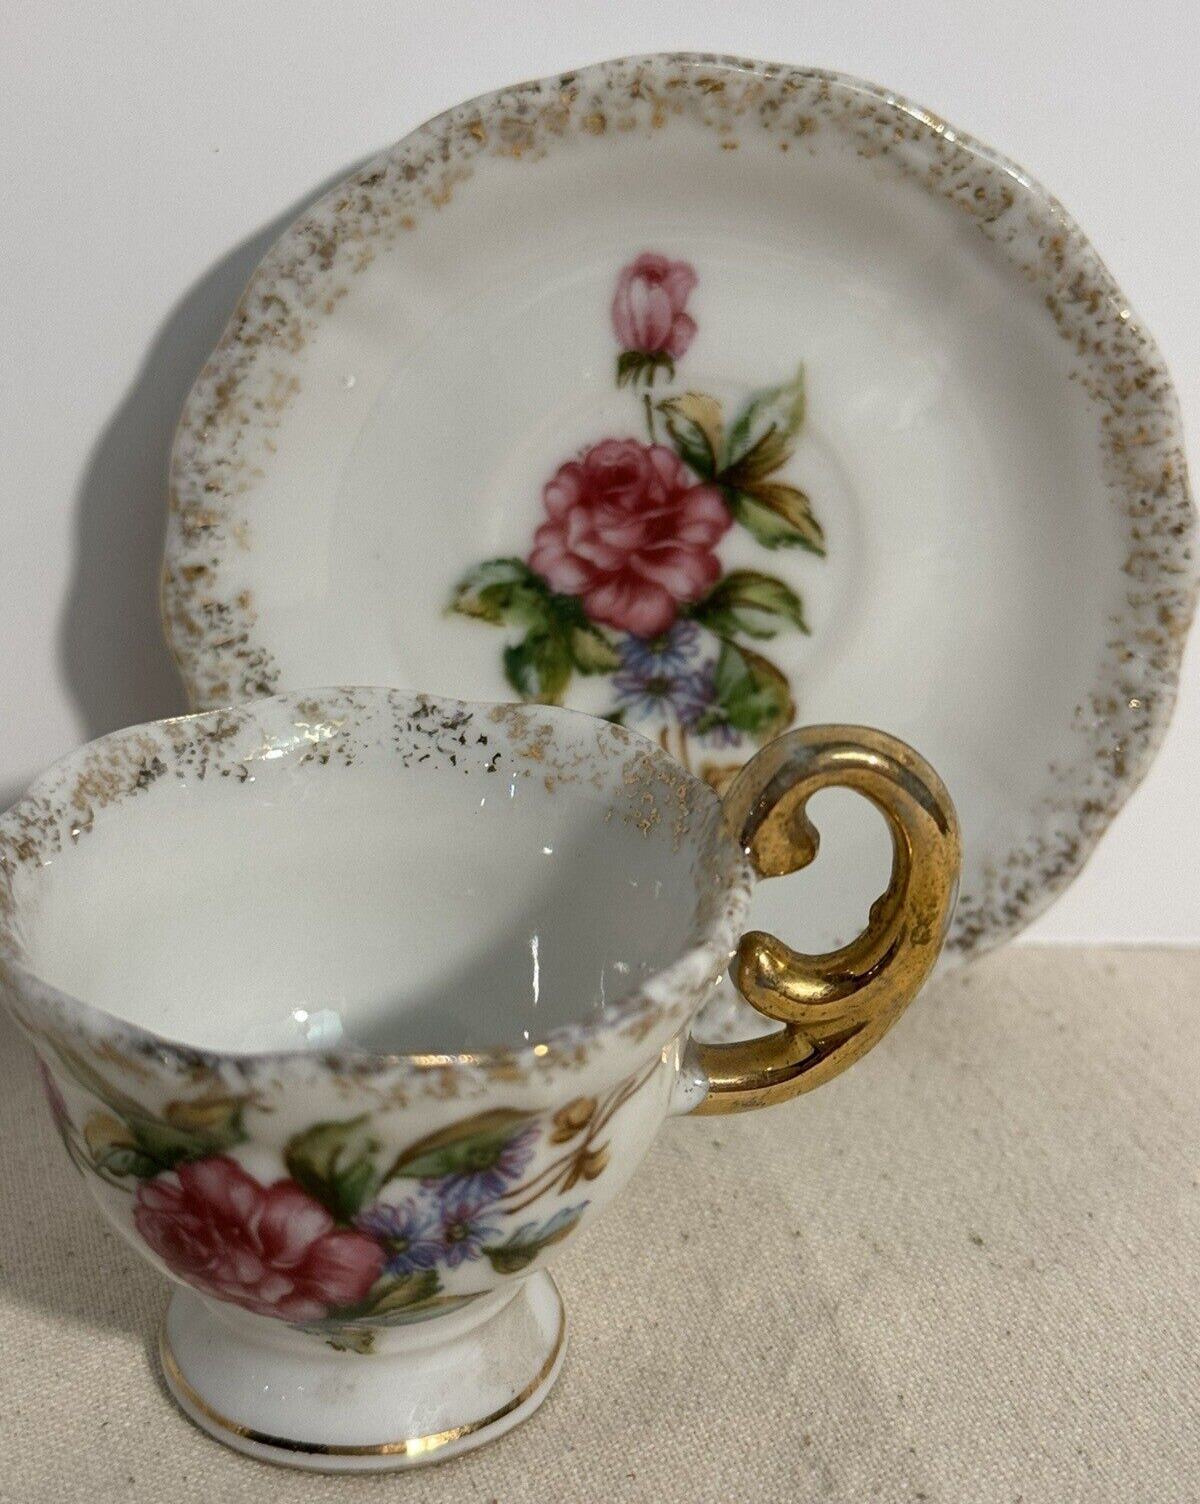 Vintage Enesco Miniature Teacup & Saucer with gold accents - Fine China - Japan